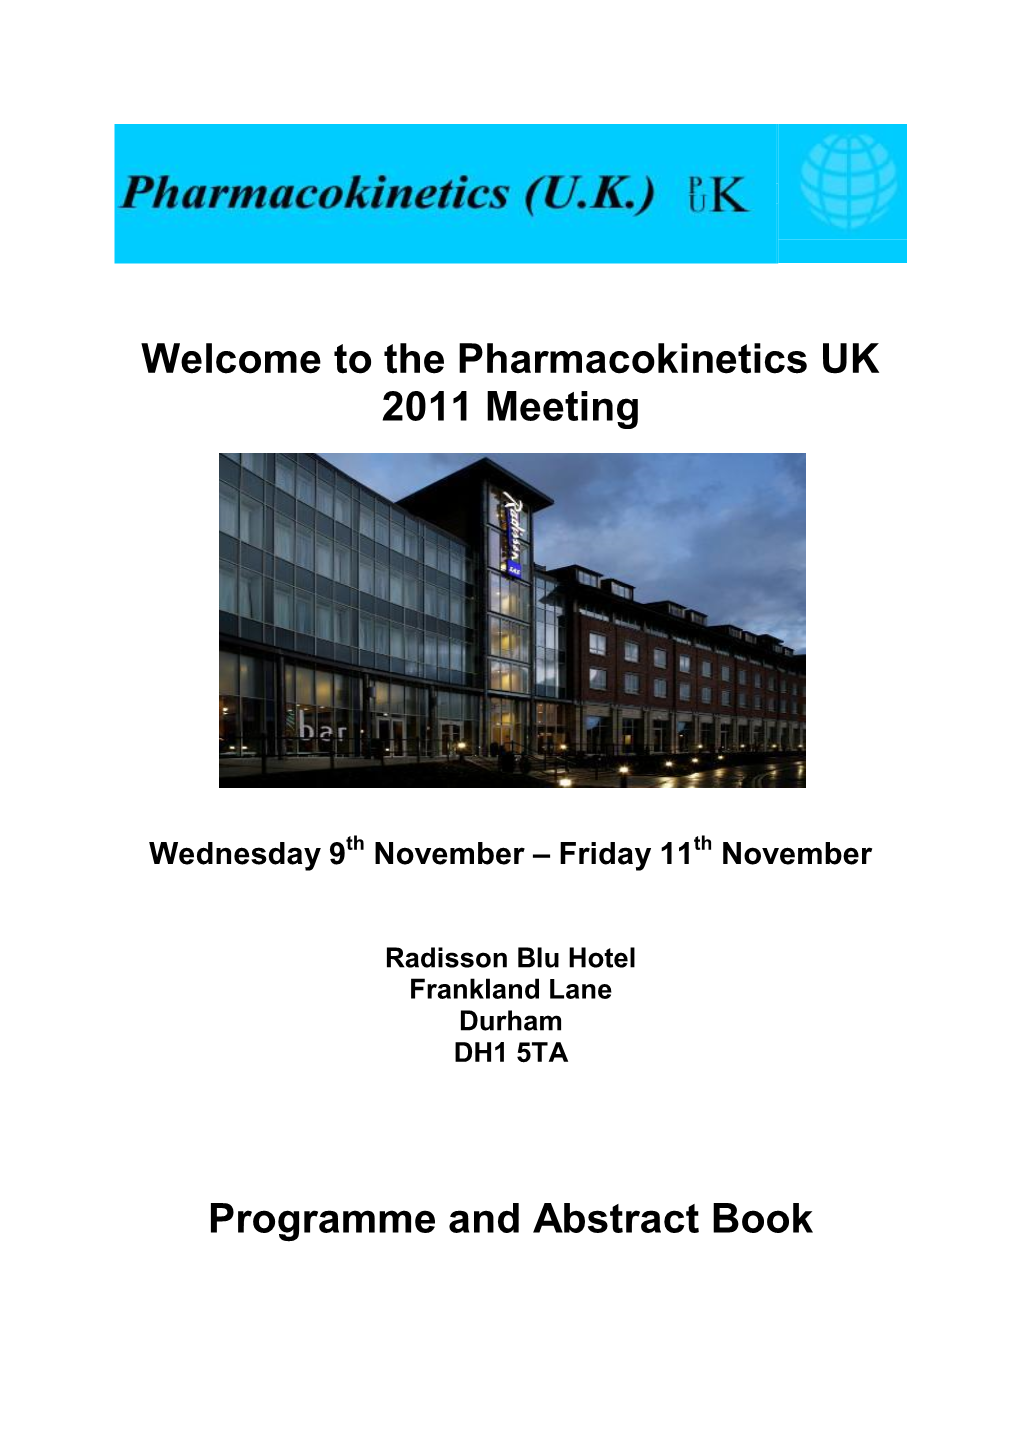 The Pharmacokinetics UK 2011 Meeting Programme and Abstract